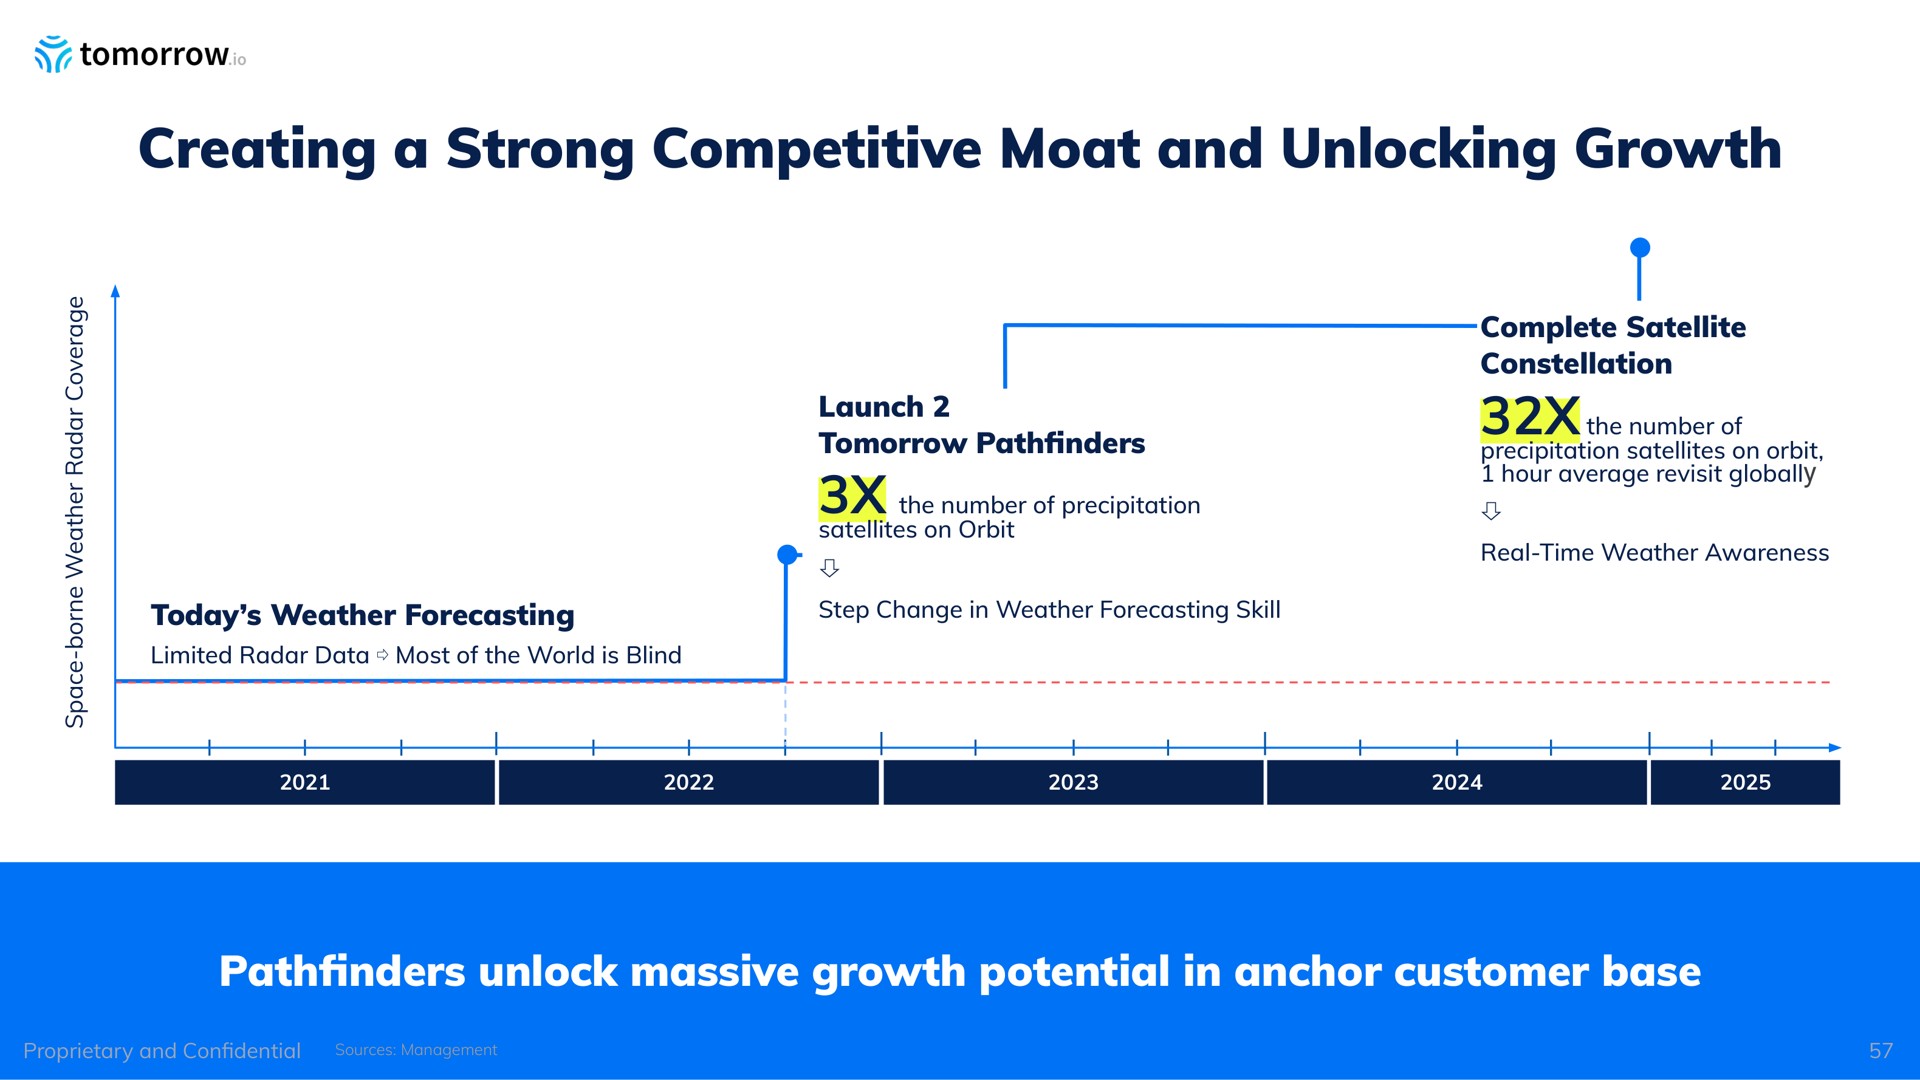 creating a strong competitive moat and unlocking growth path unlock massive growth potential in anchor customer base | Tomorrow.io